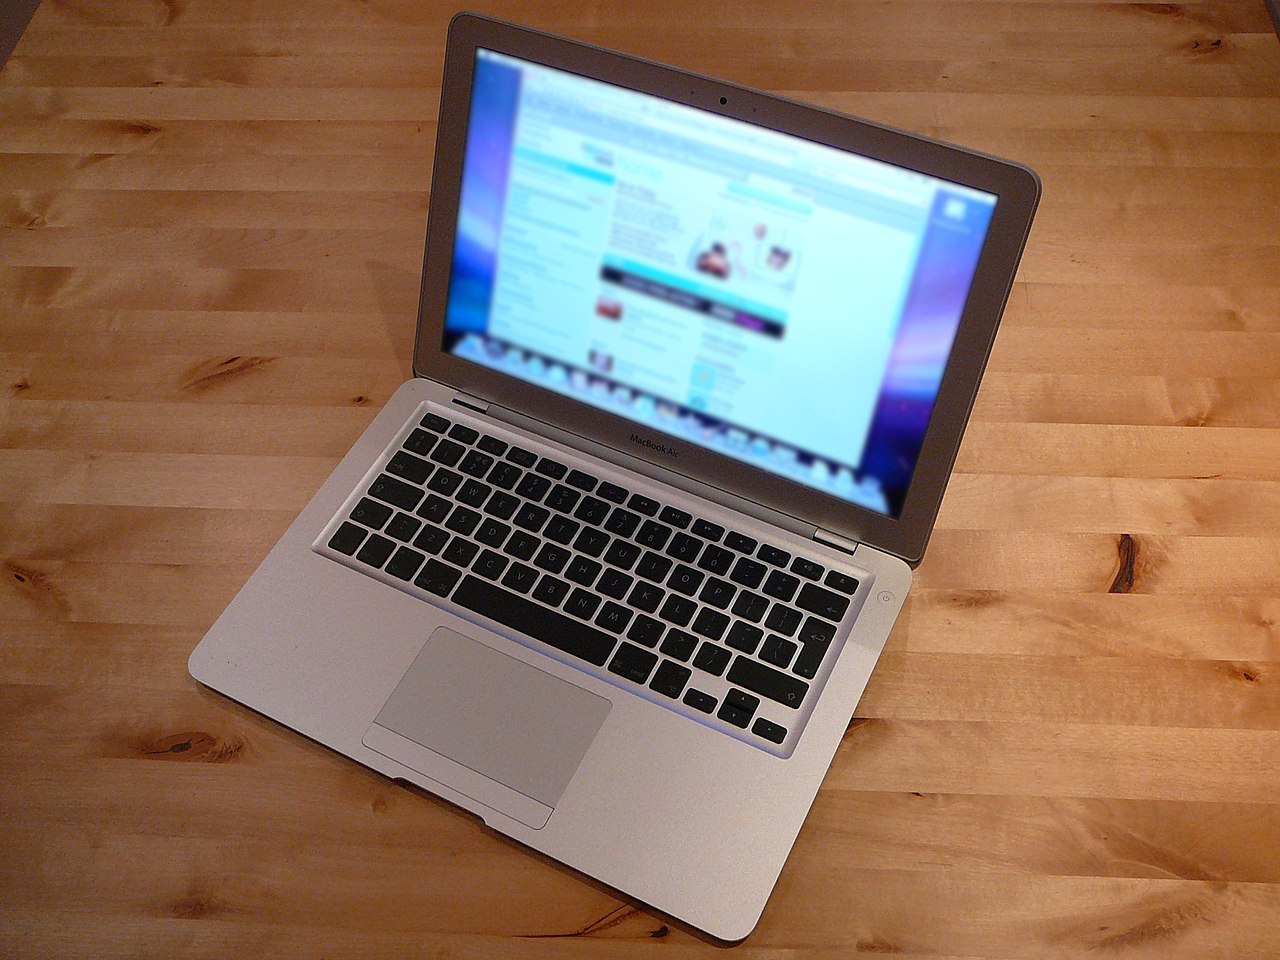 MacBook Air 2022 with open display is in the brown table.